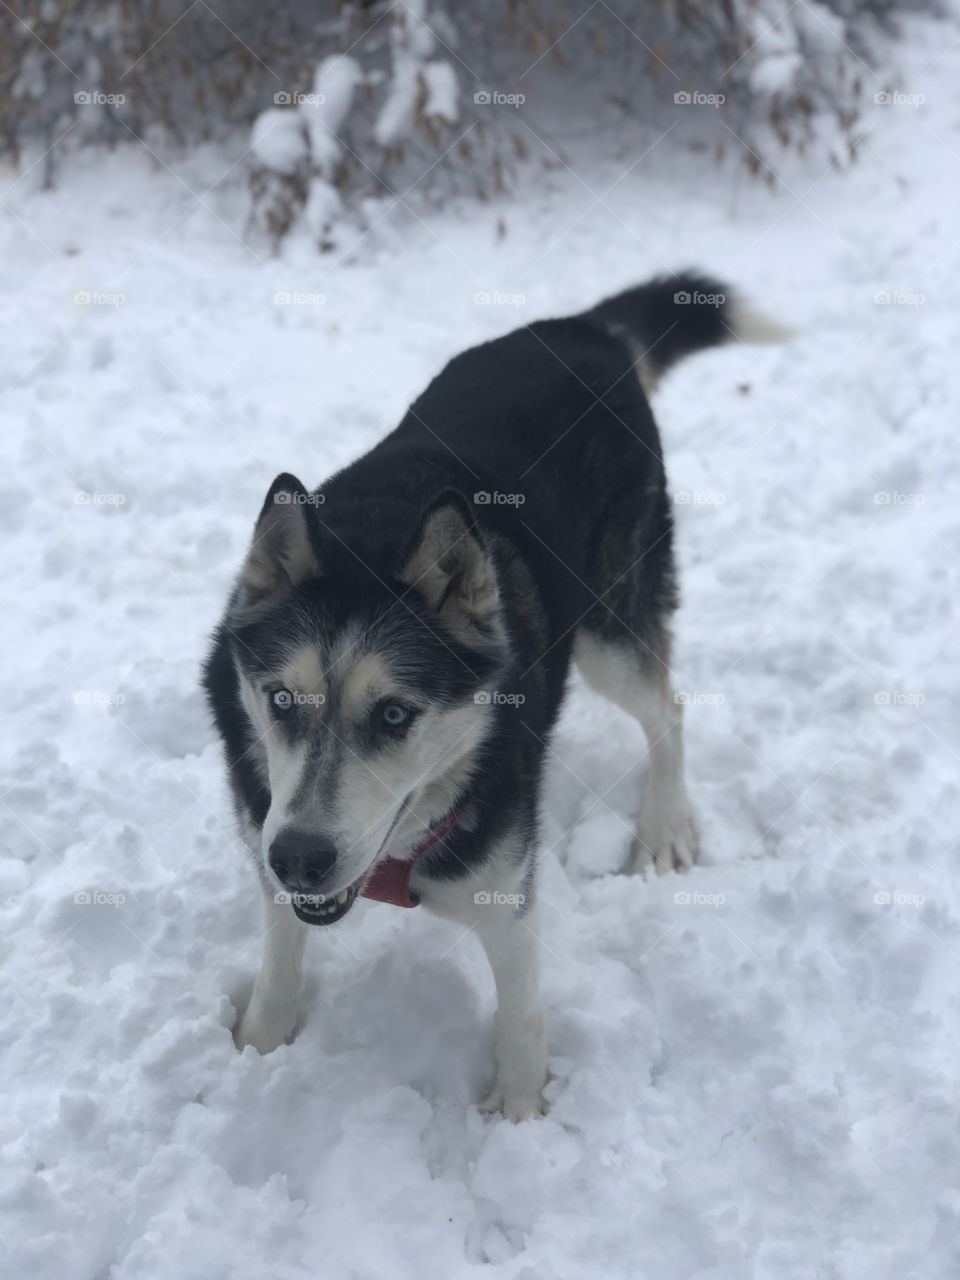 He really loves the snow. We don’t get it too often